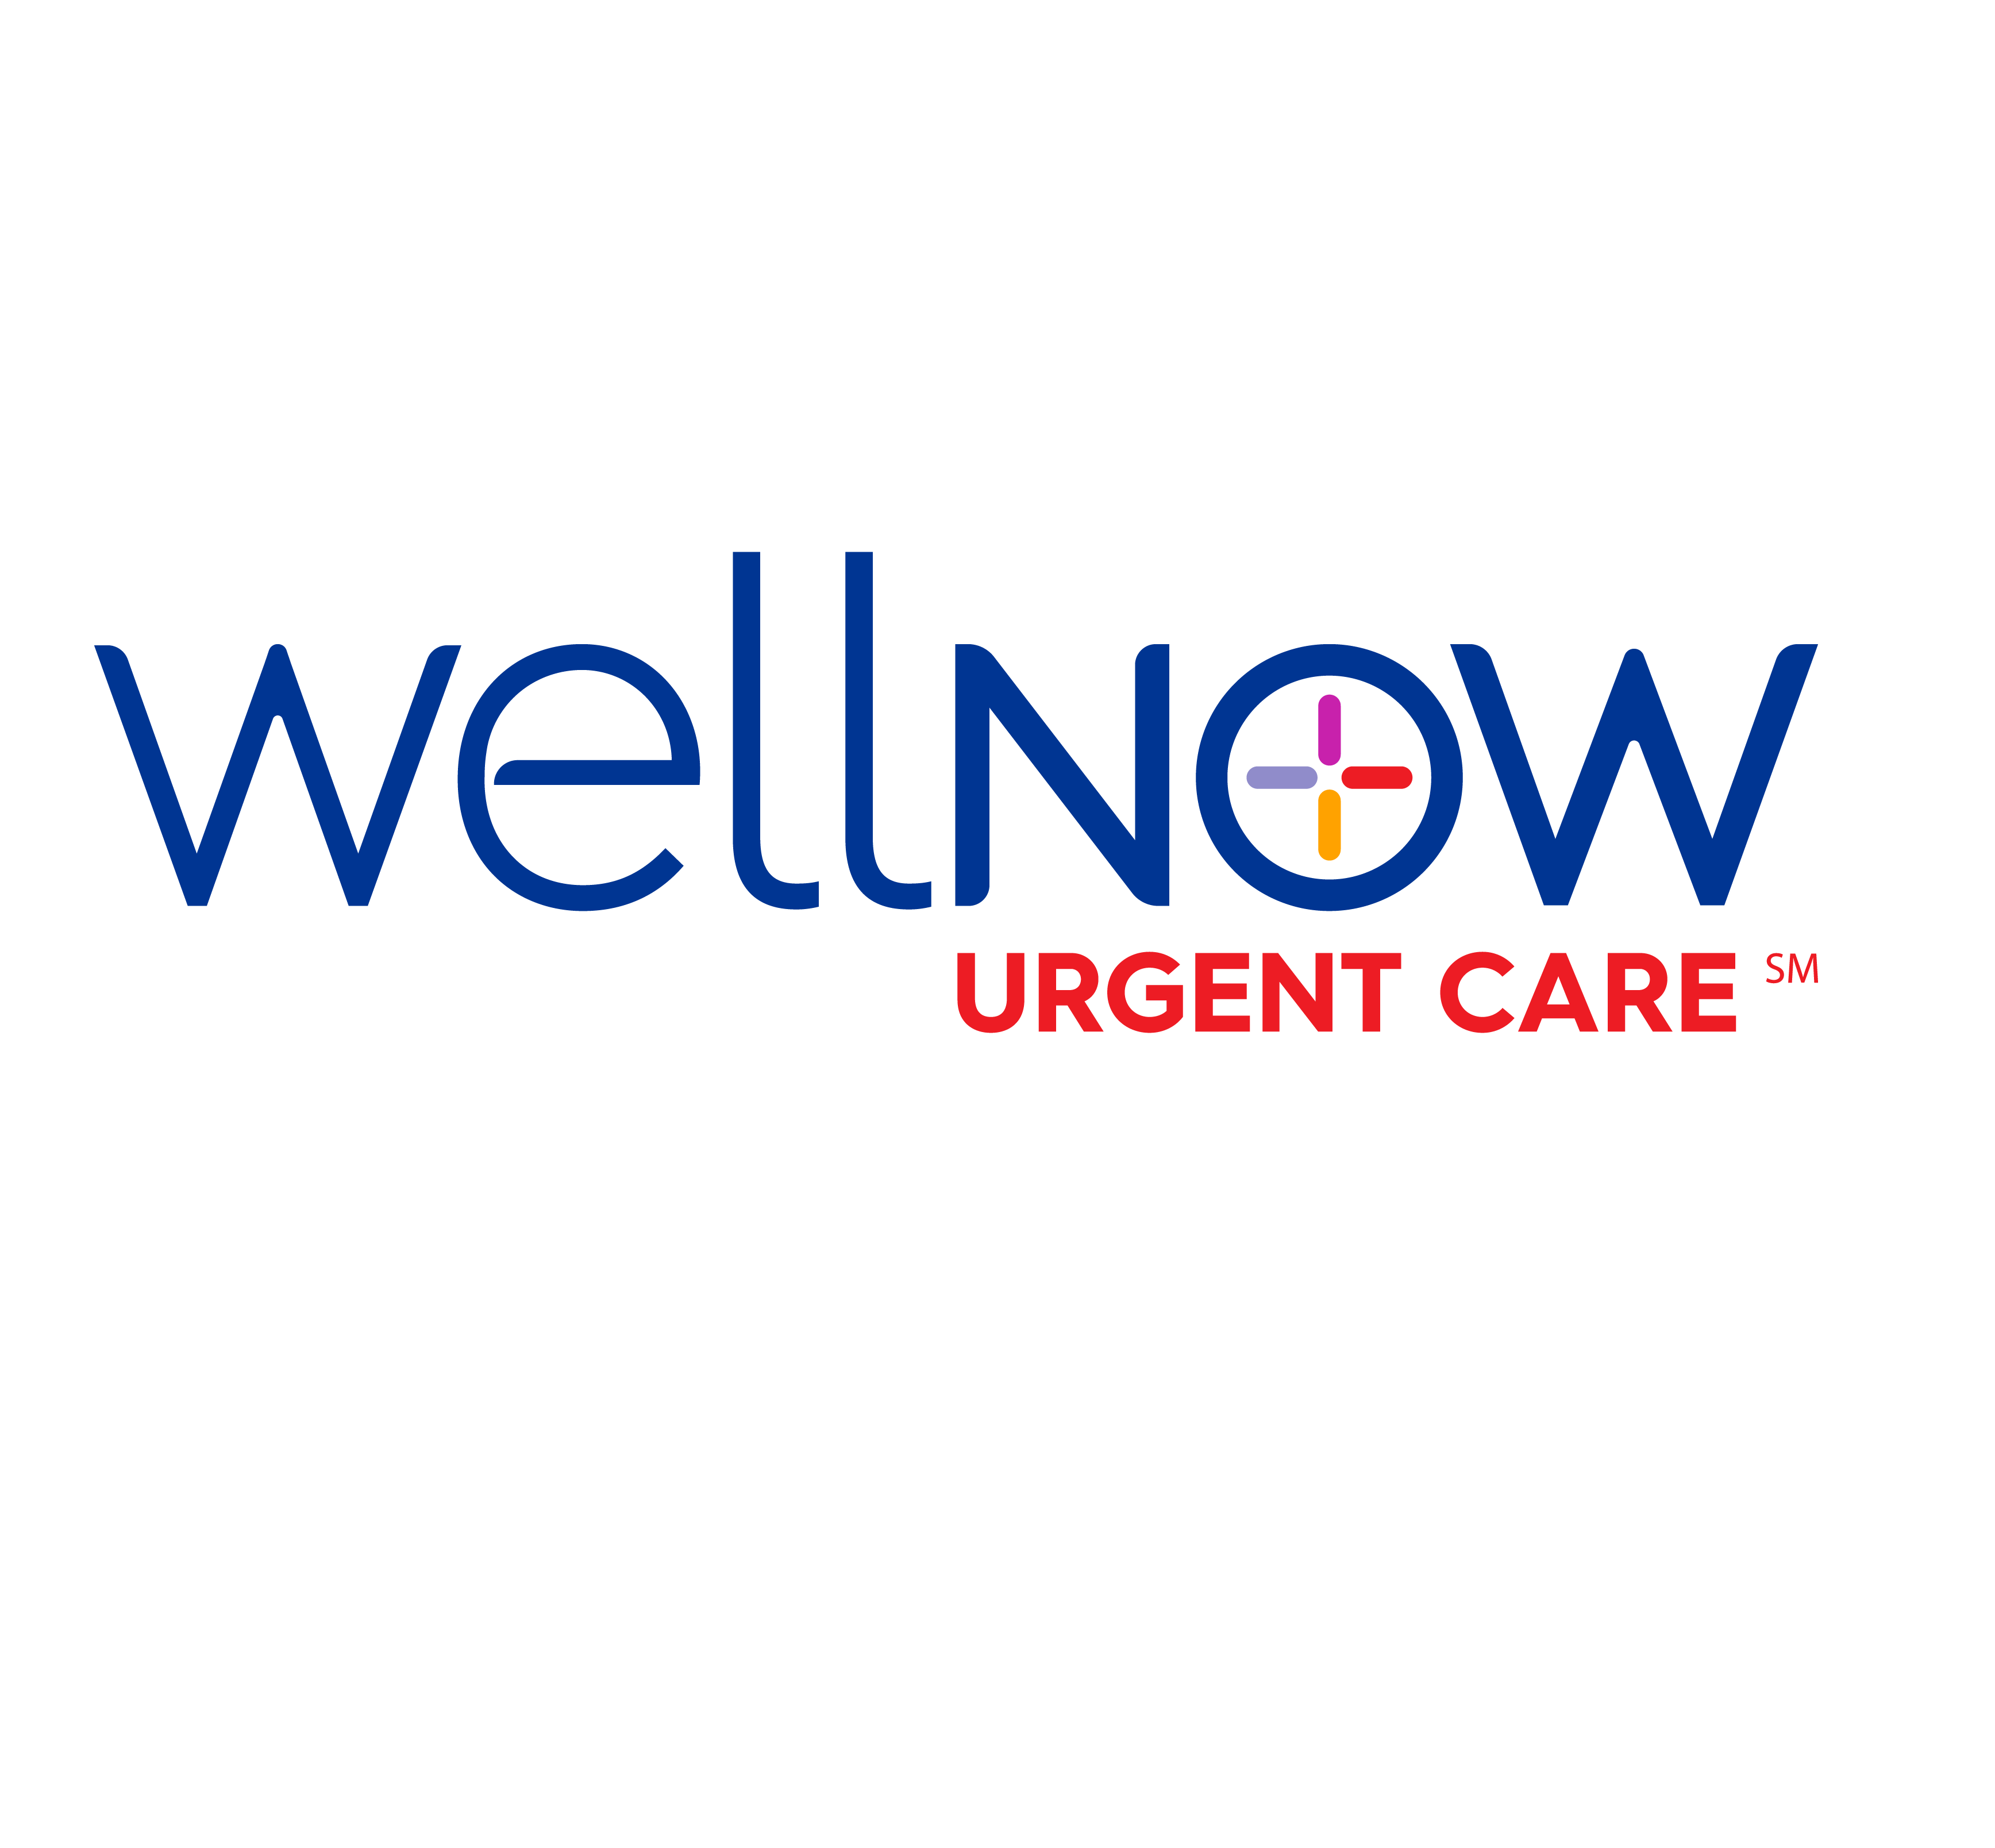 WellNow Urgent Care offers quick, quality urgent care with exceptional service for the non-life-thre WellNow Urgent Care East Amherst (716)428-5545